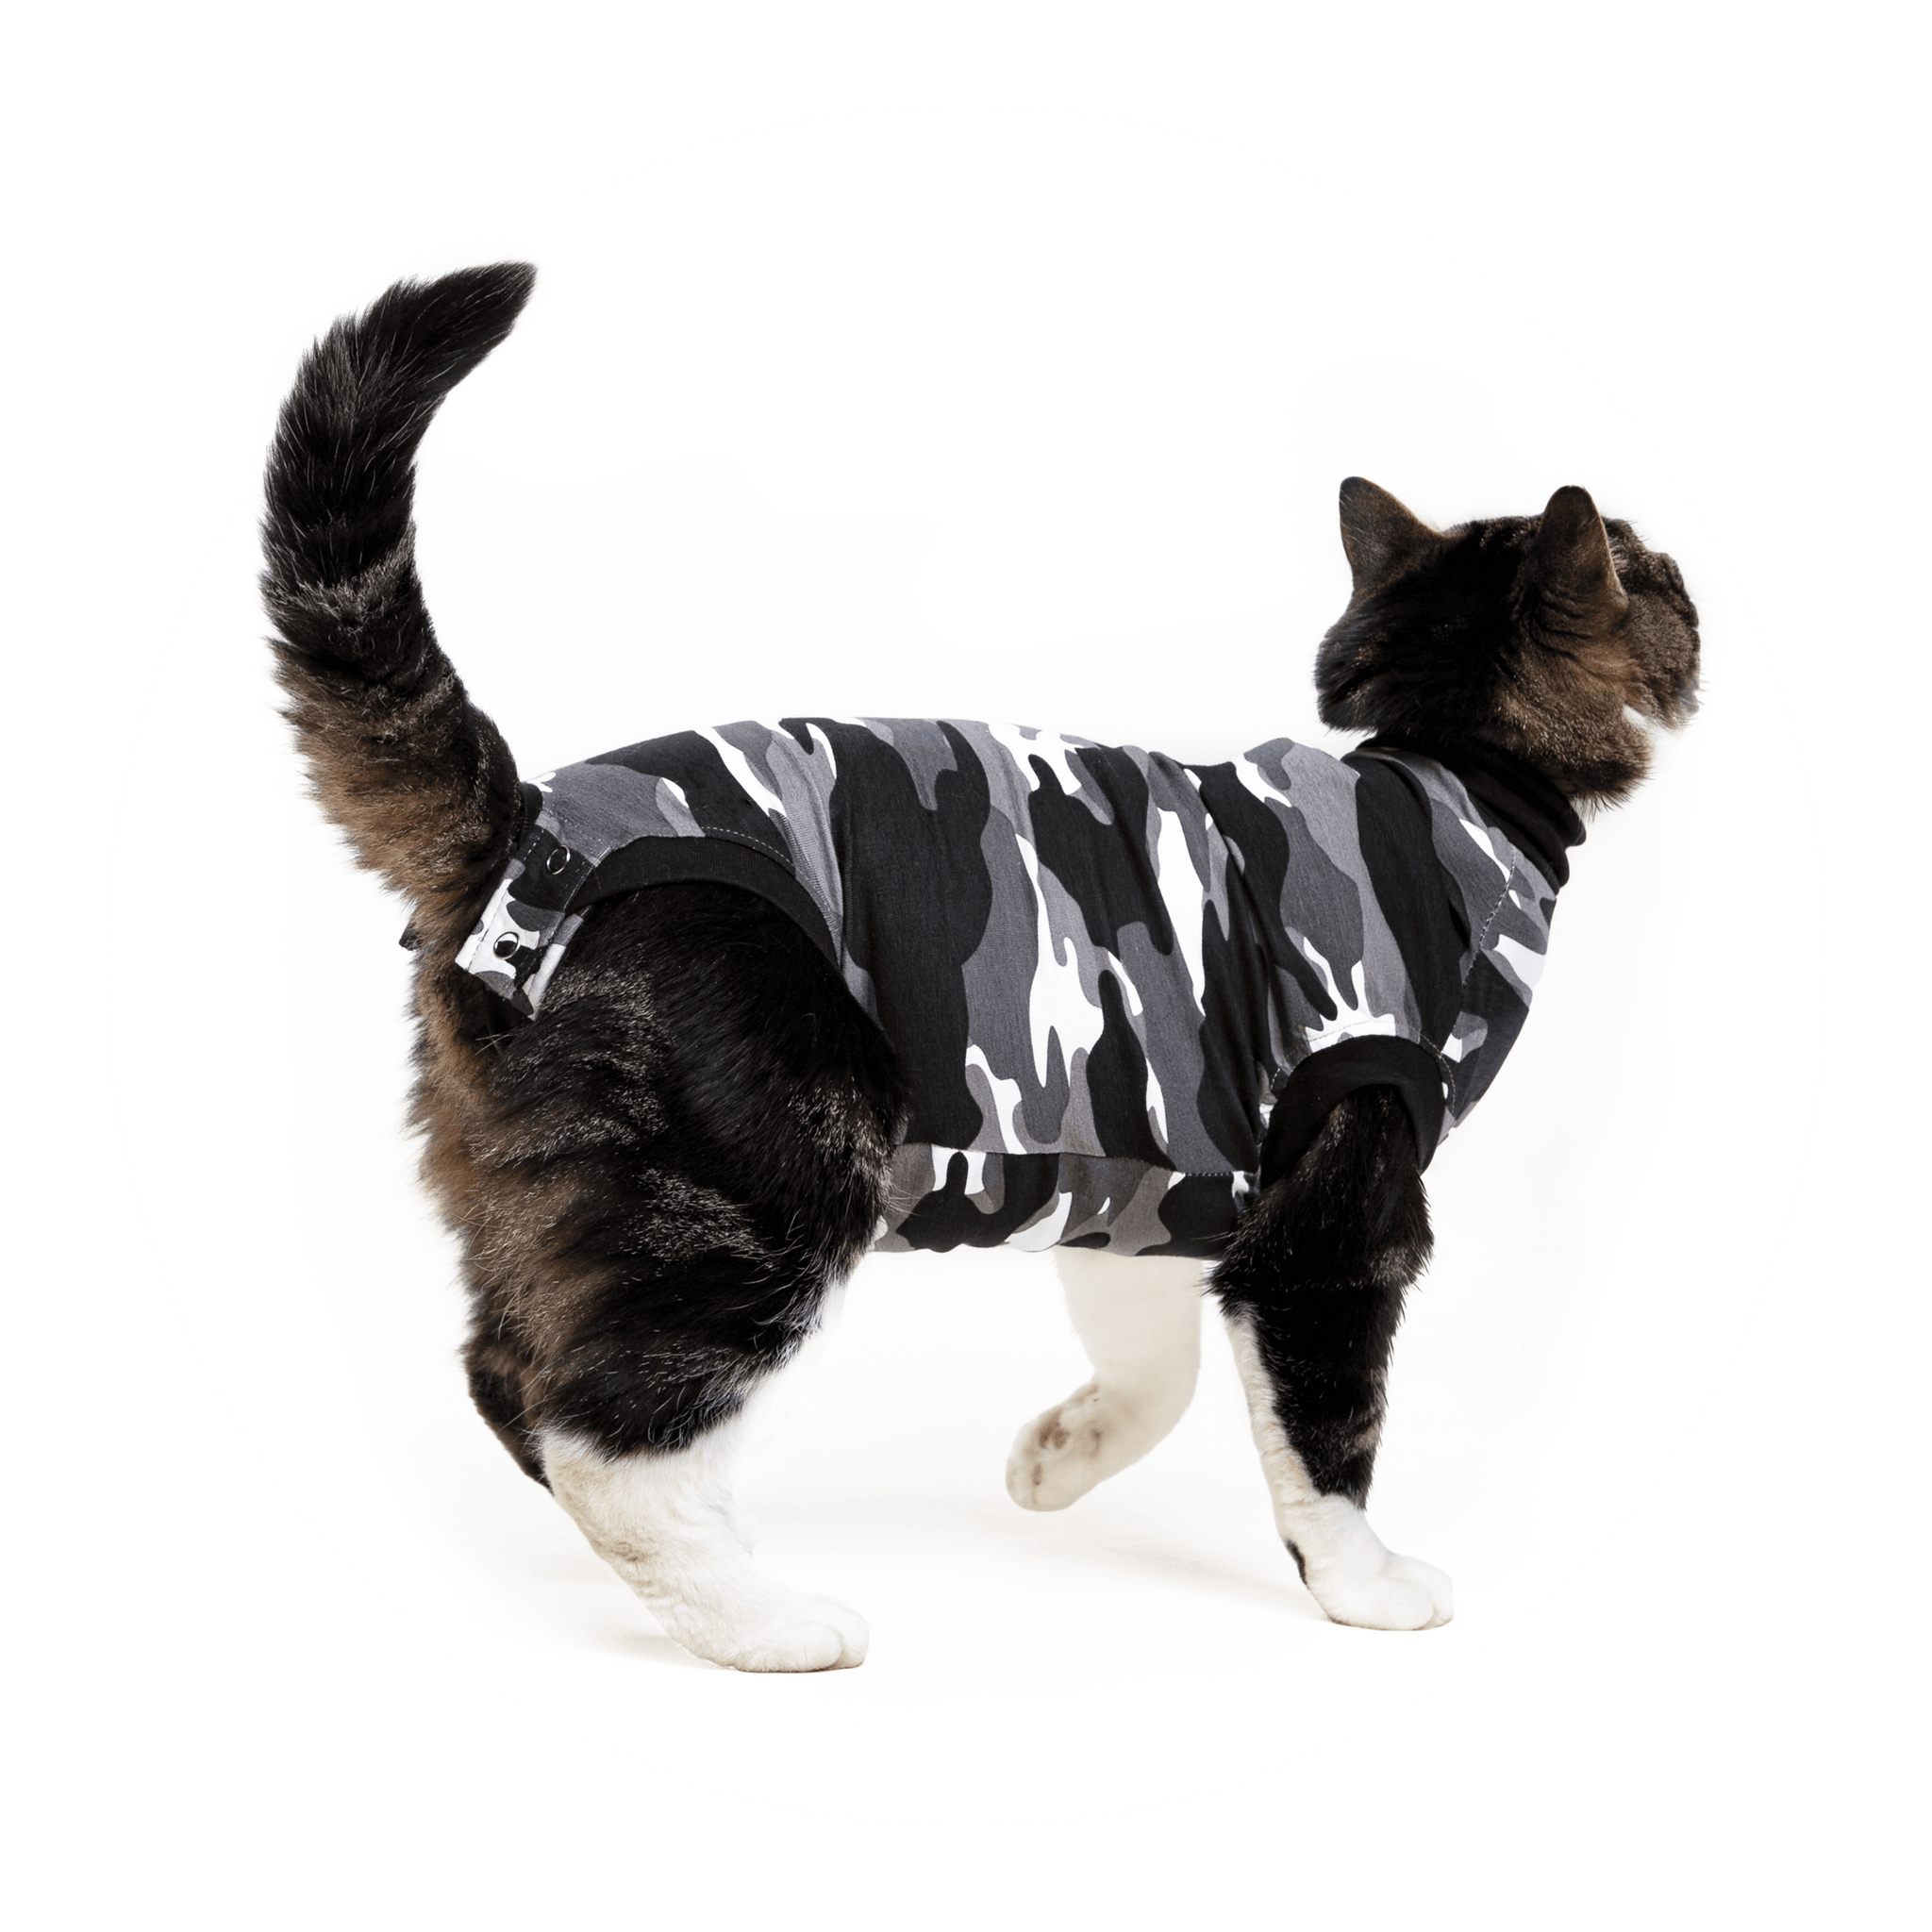 Recovery Suit® Cat - Modern Cat